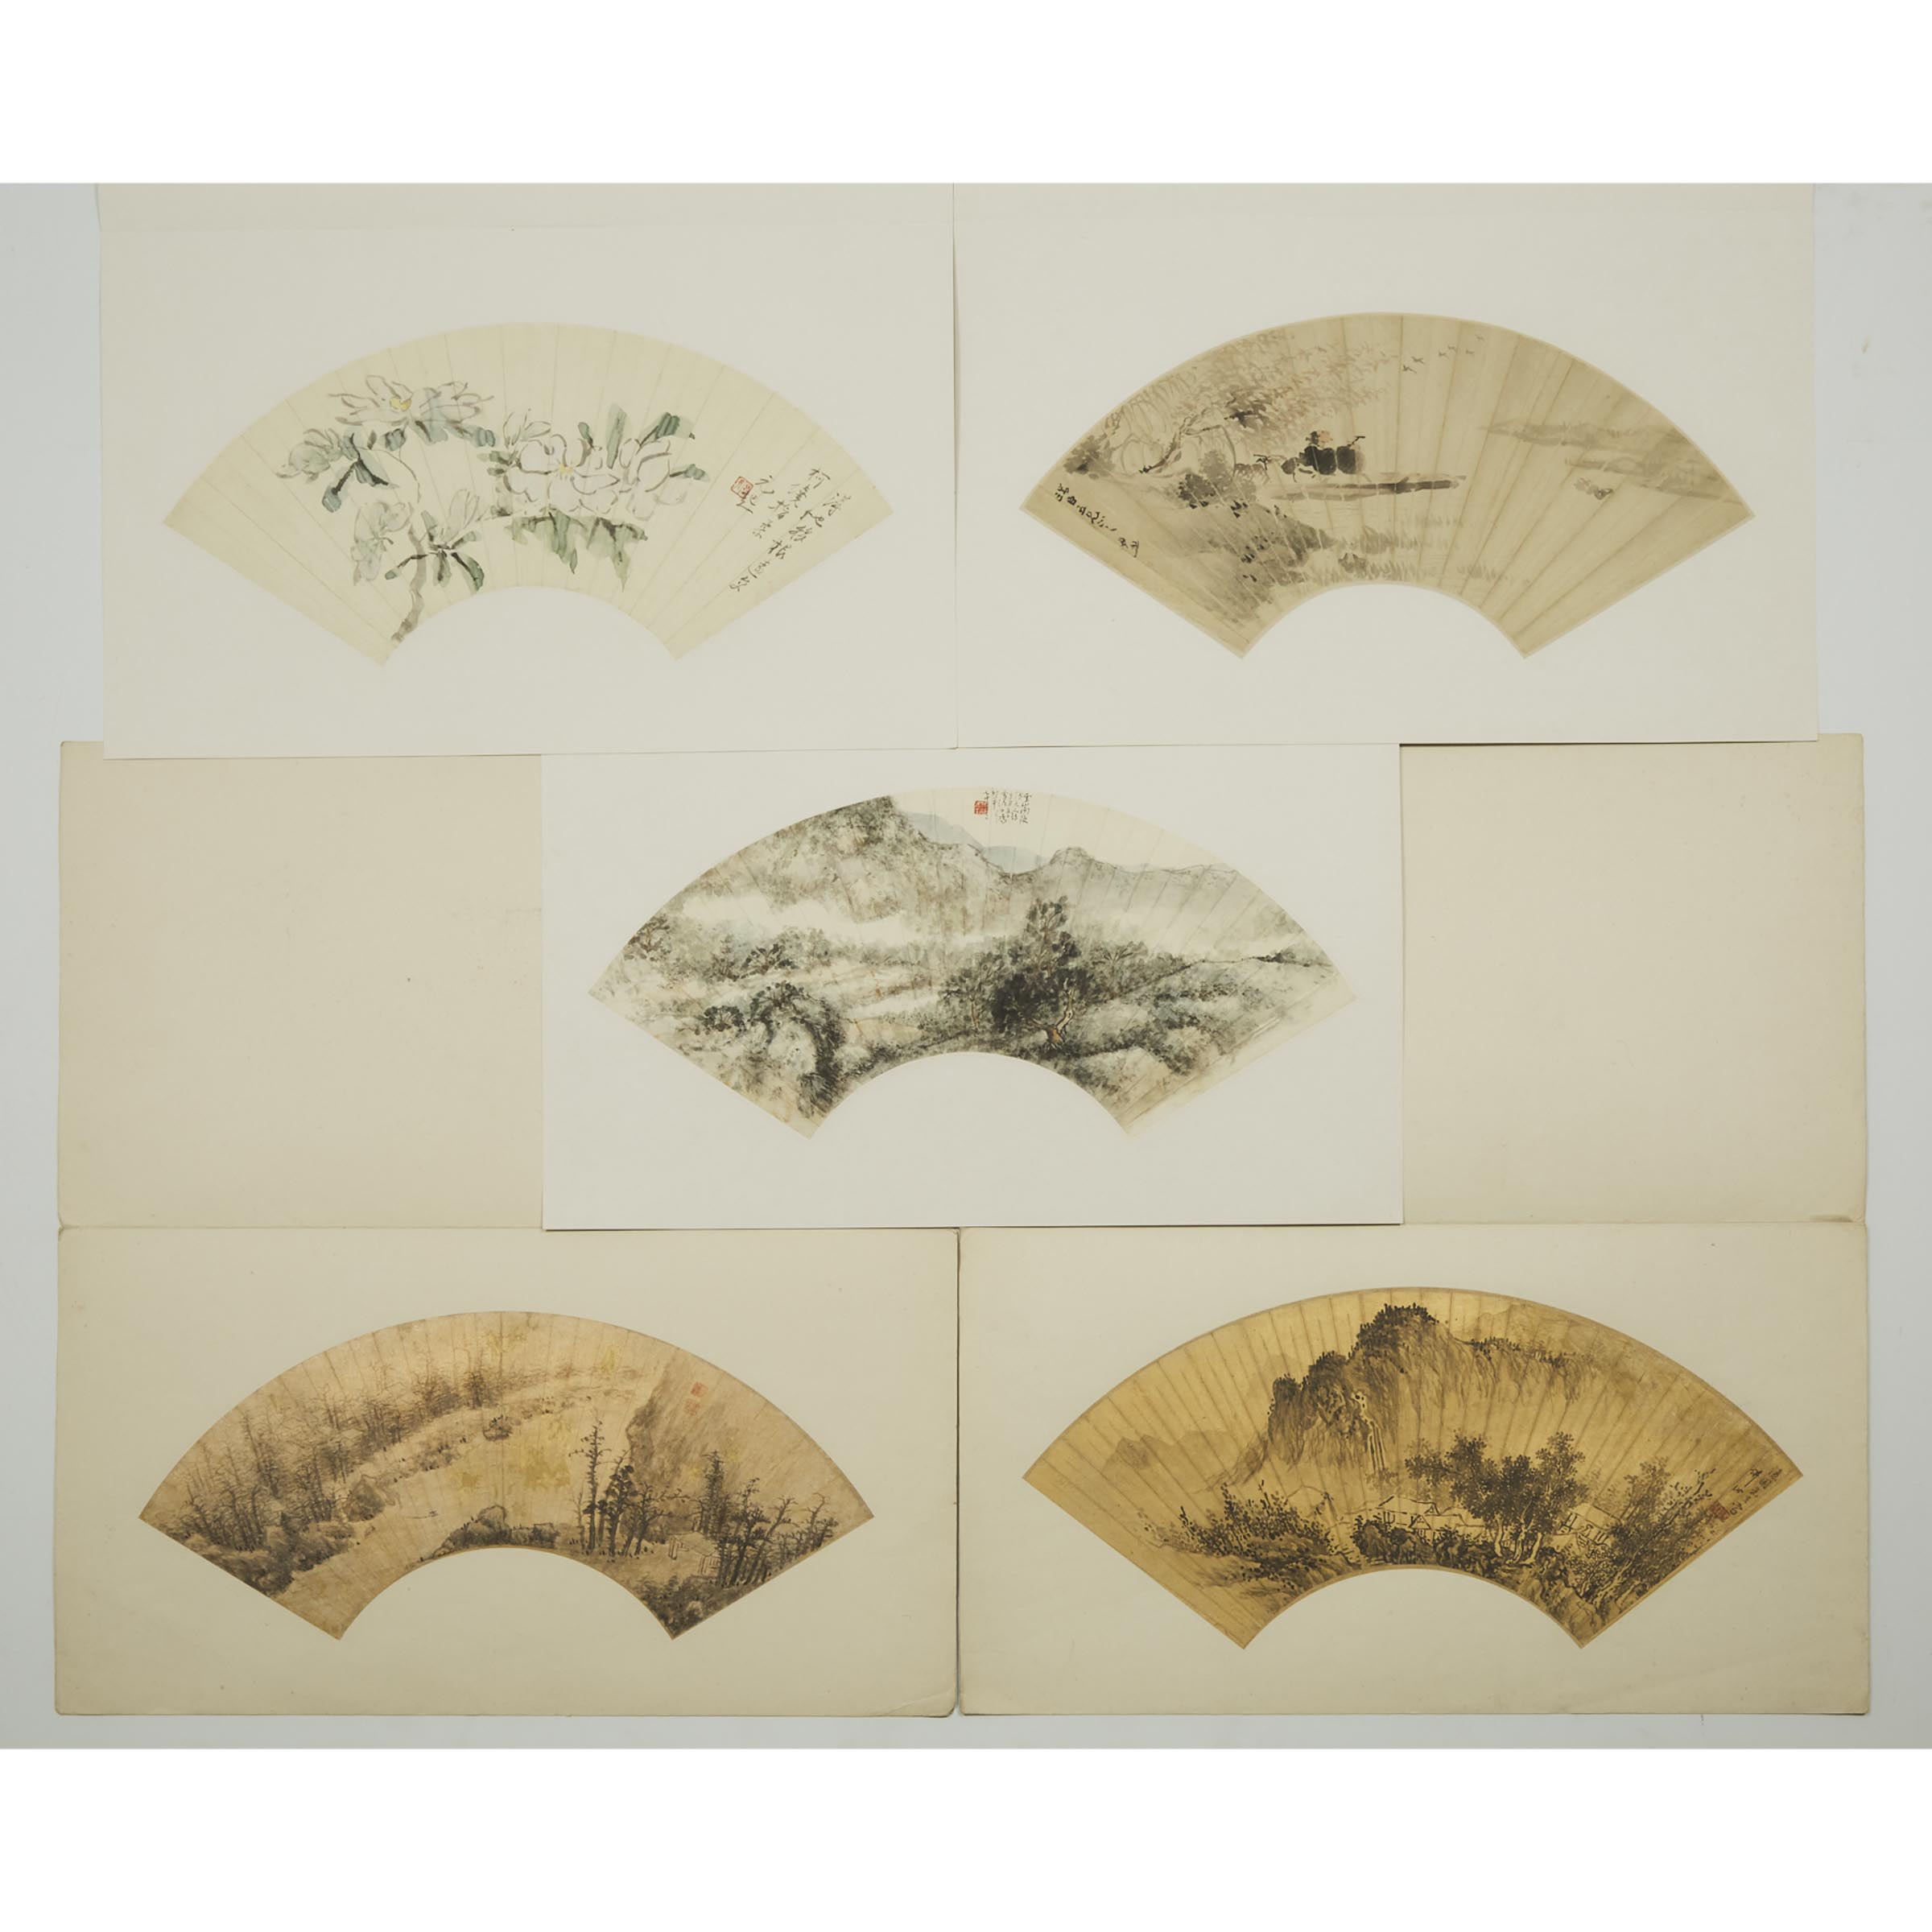 A Group of Five Fan Paintings, Late Qing/Republican Period, 19th/Early 20th Century